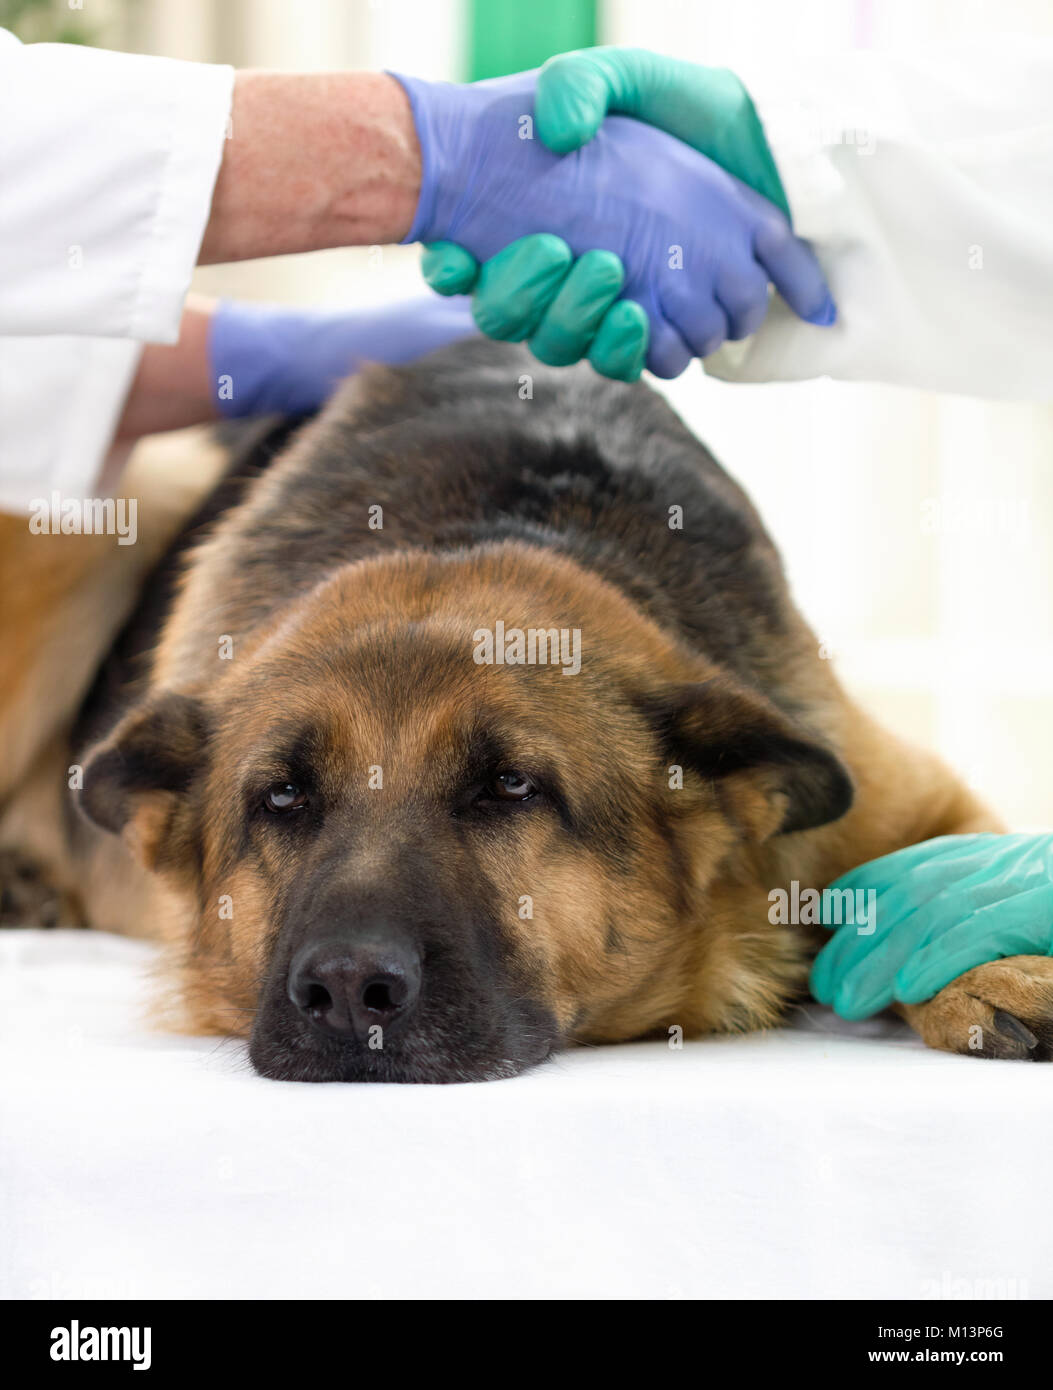 sick German shepherd dog to a vet, vets shake hands after a successful examination Stock Photo